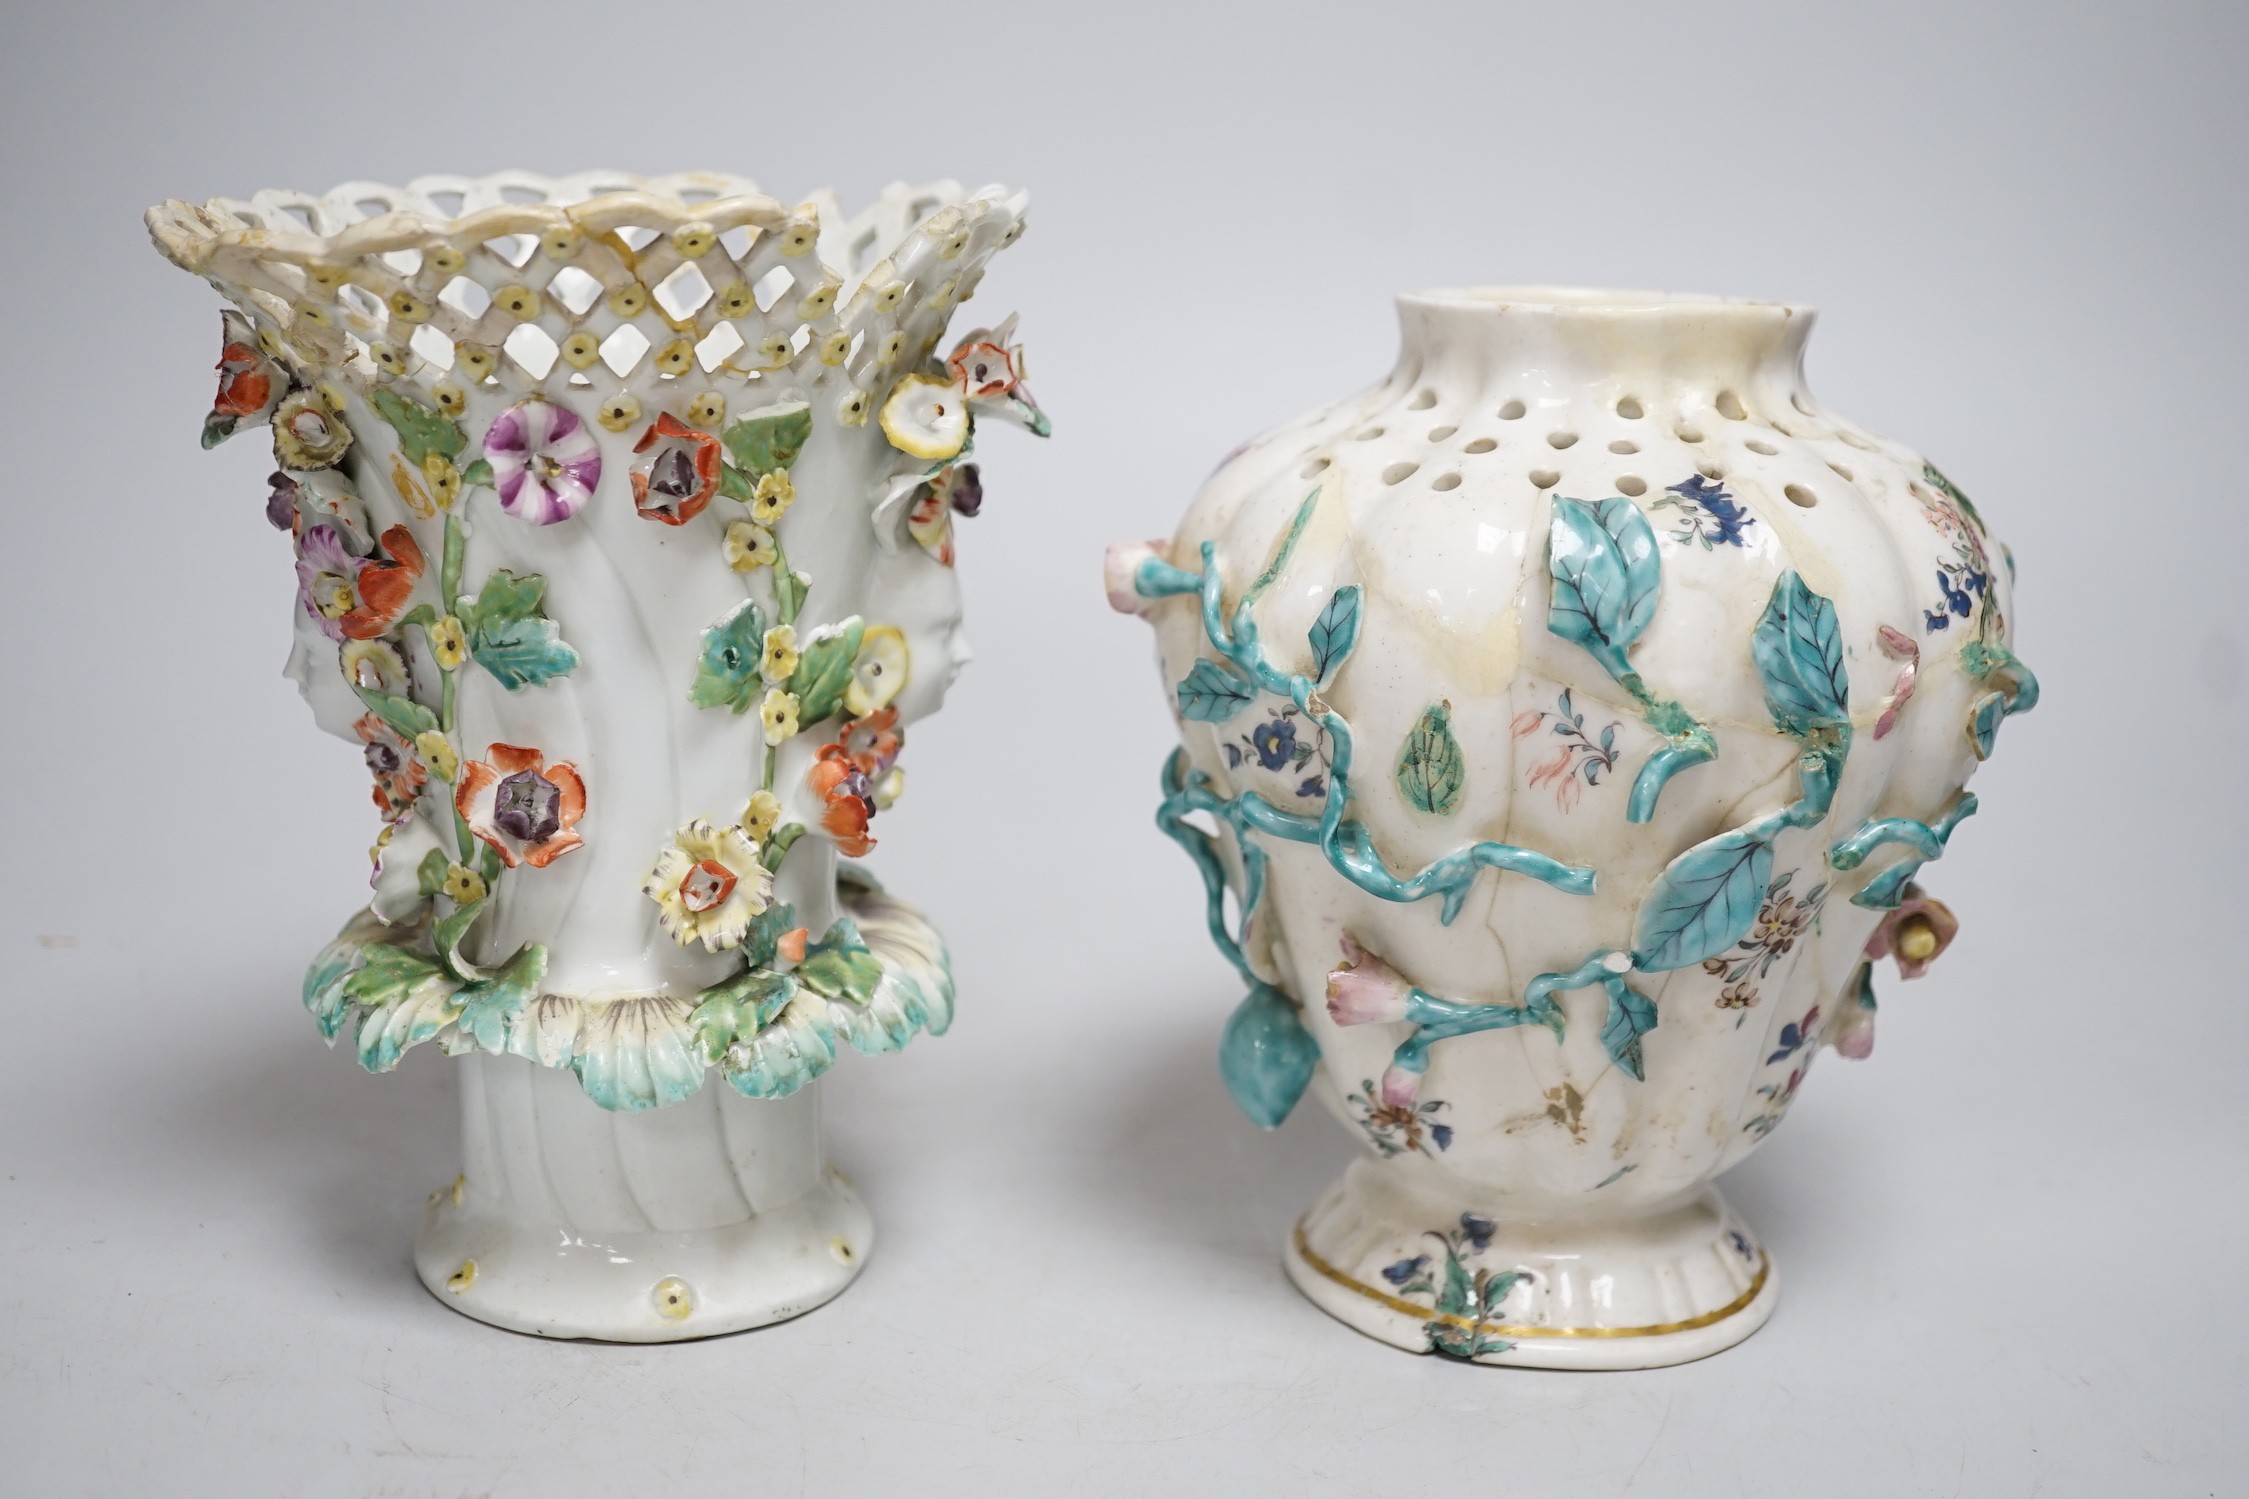 An 18th century Chelsea pot pourri vase, red anchor period, encrusted and painted with leaves and flowers and a Bow frill vase with mask heads encrusted with flowers. Tallest 16.5cm                                       